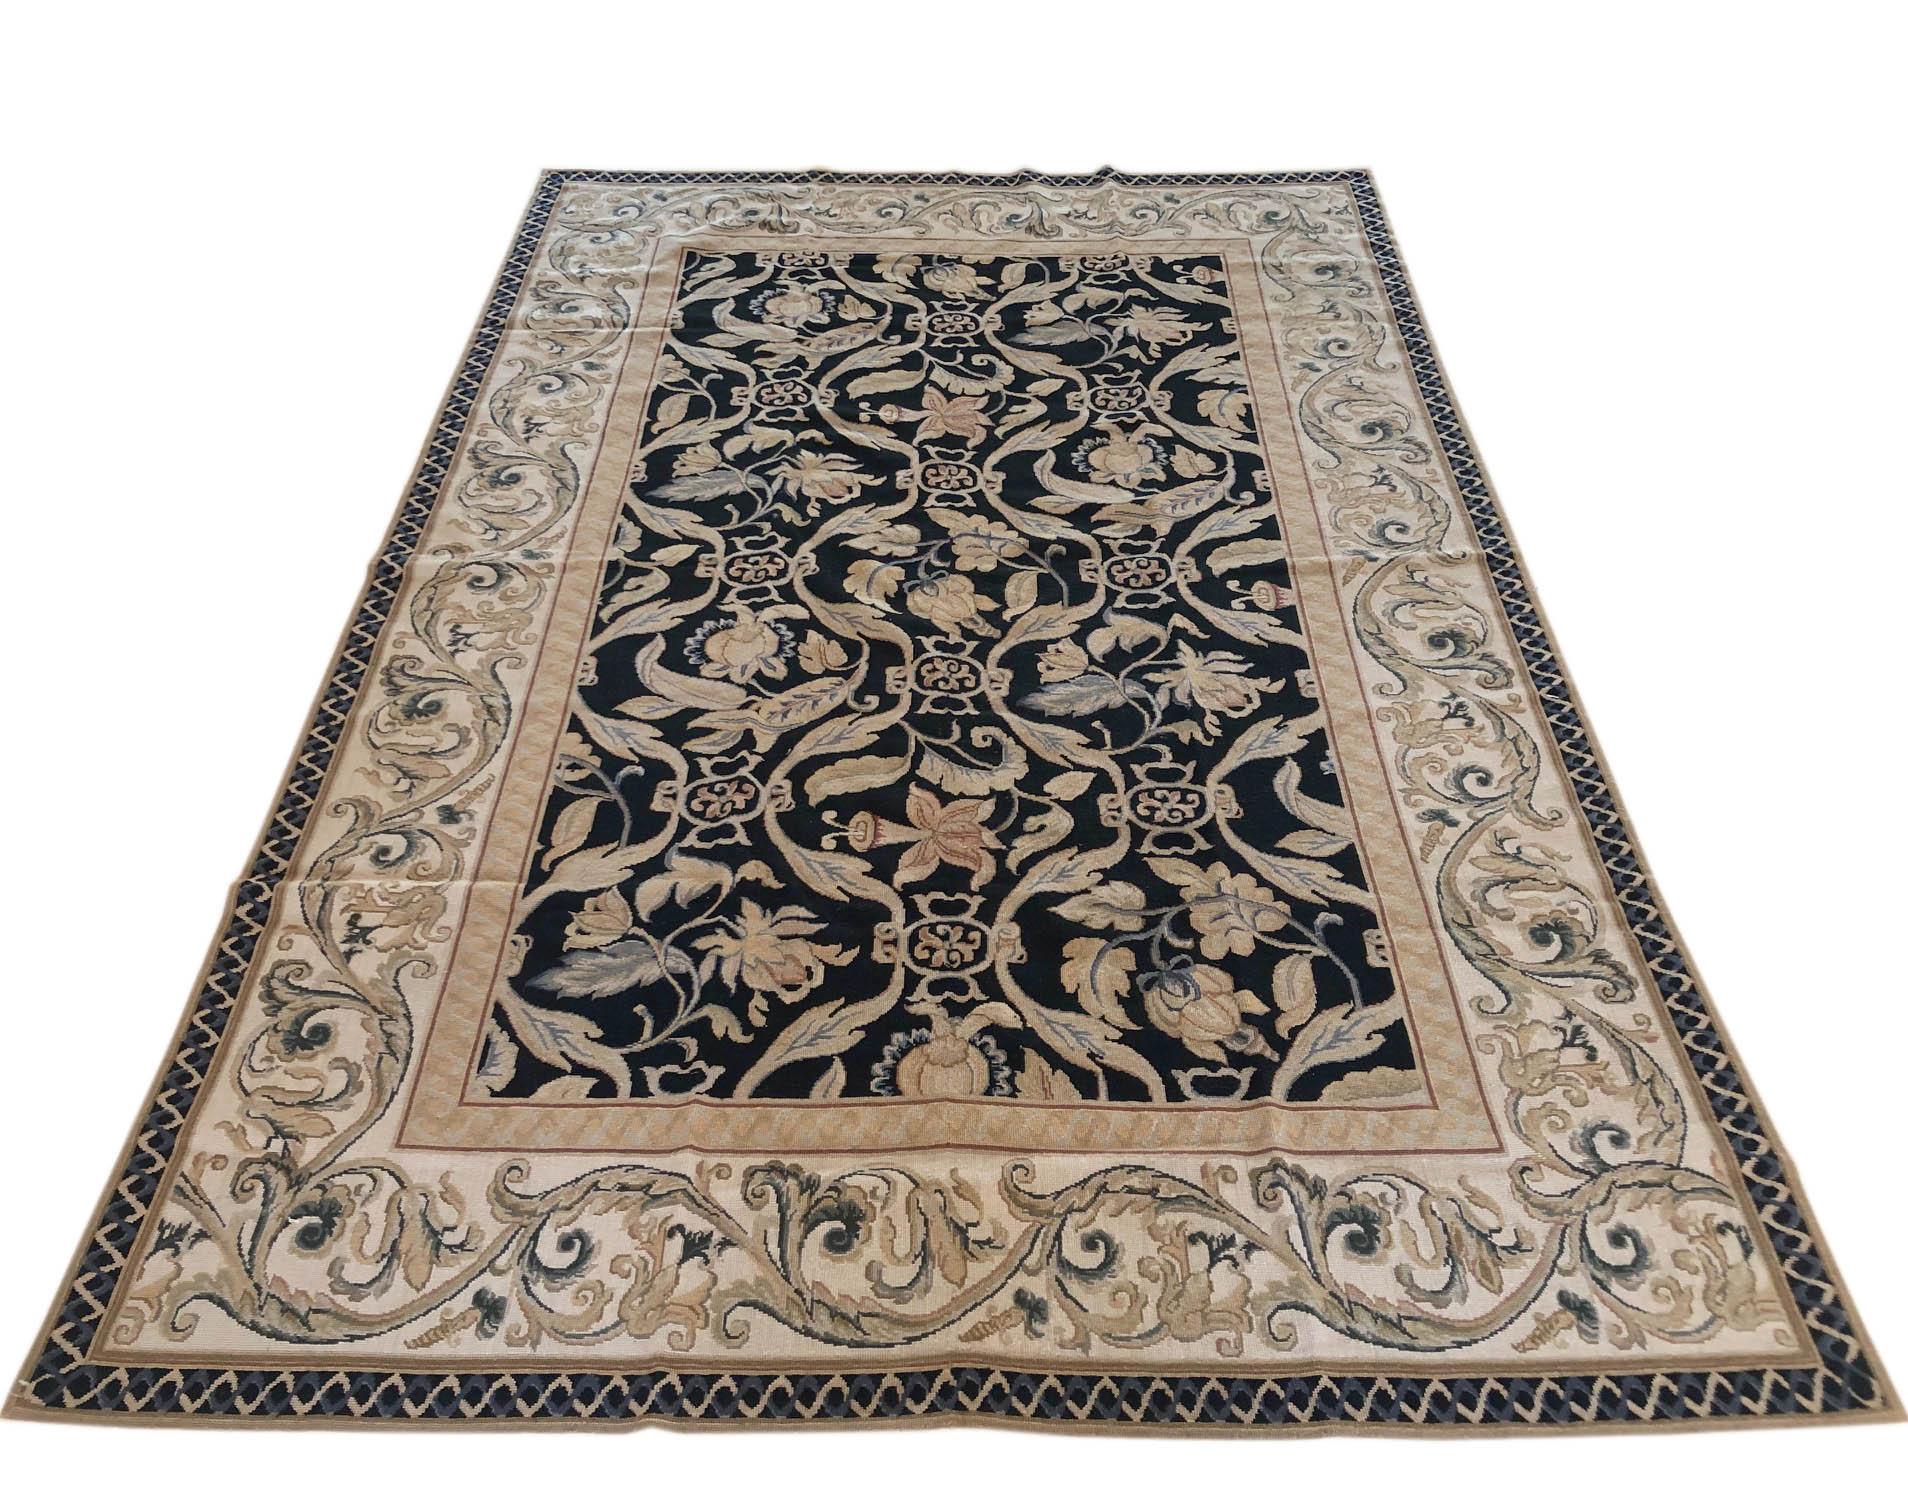 Chinese all over floral French leaf design needle point rug. The base color is black and the border is cream. The size is 5 feet 7 inches wide by 9 feet tall.